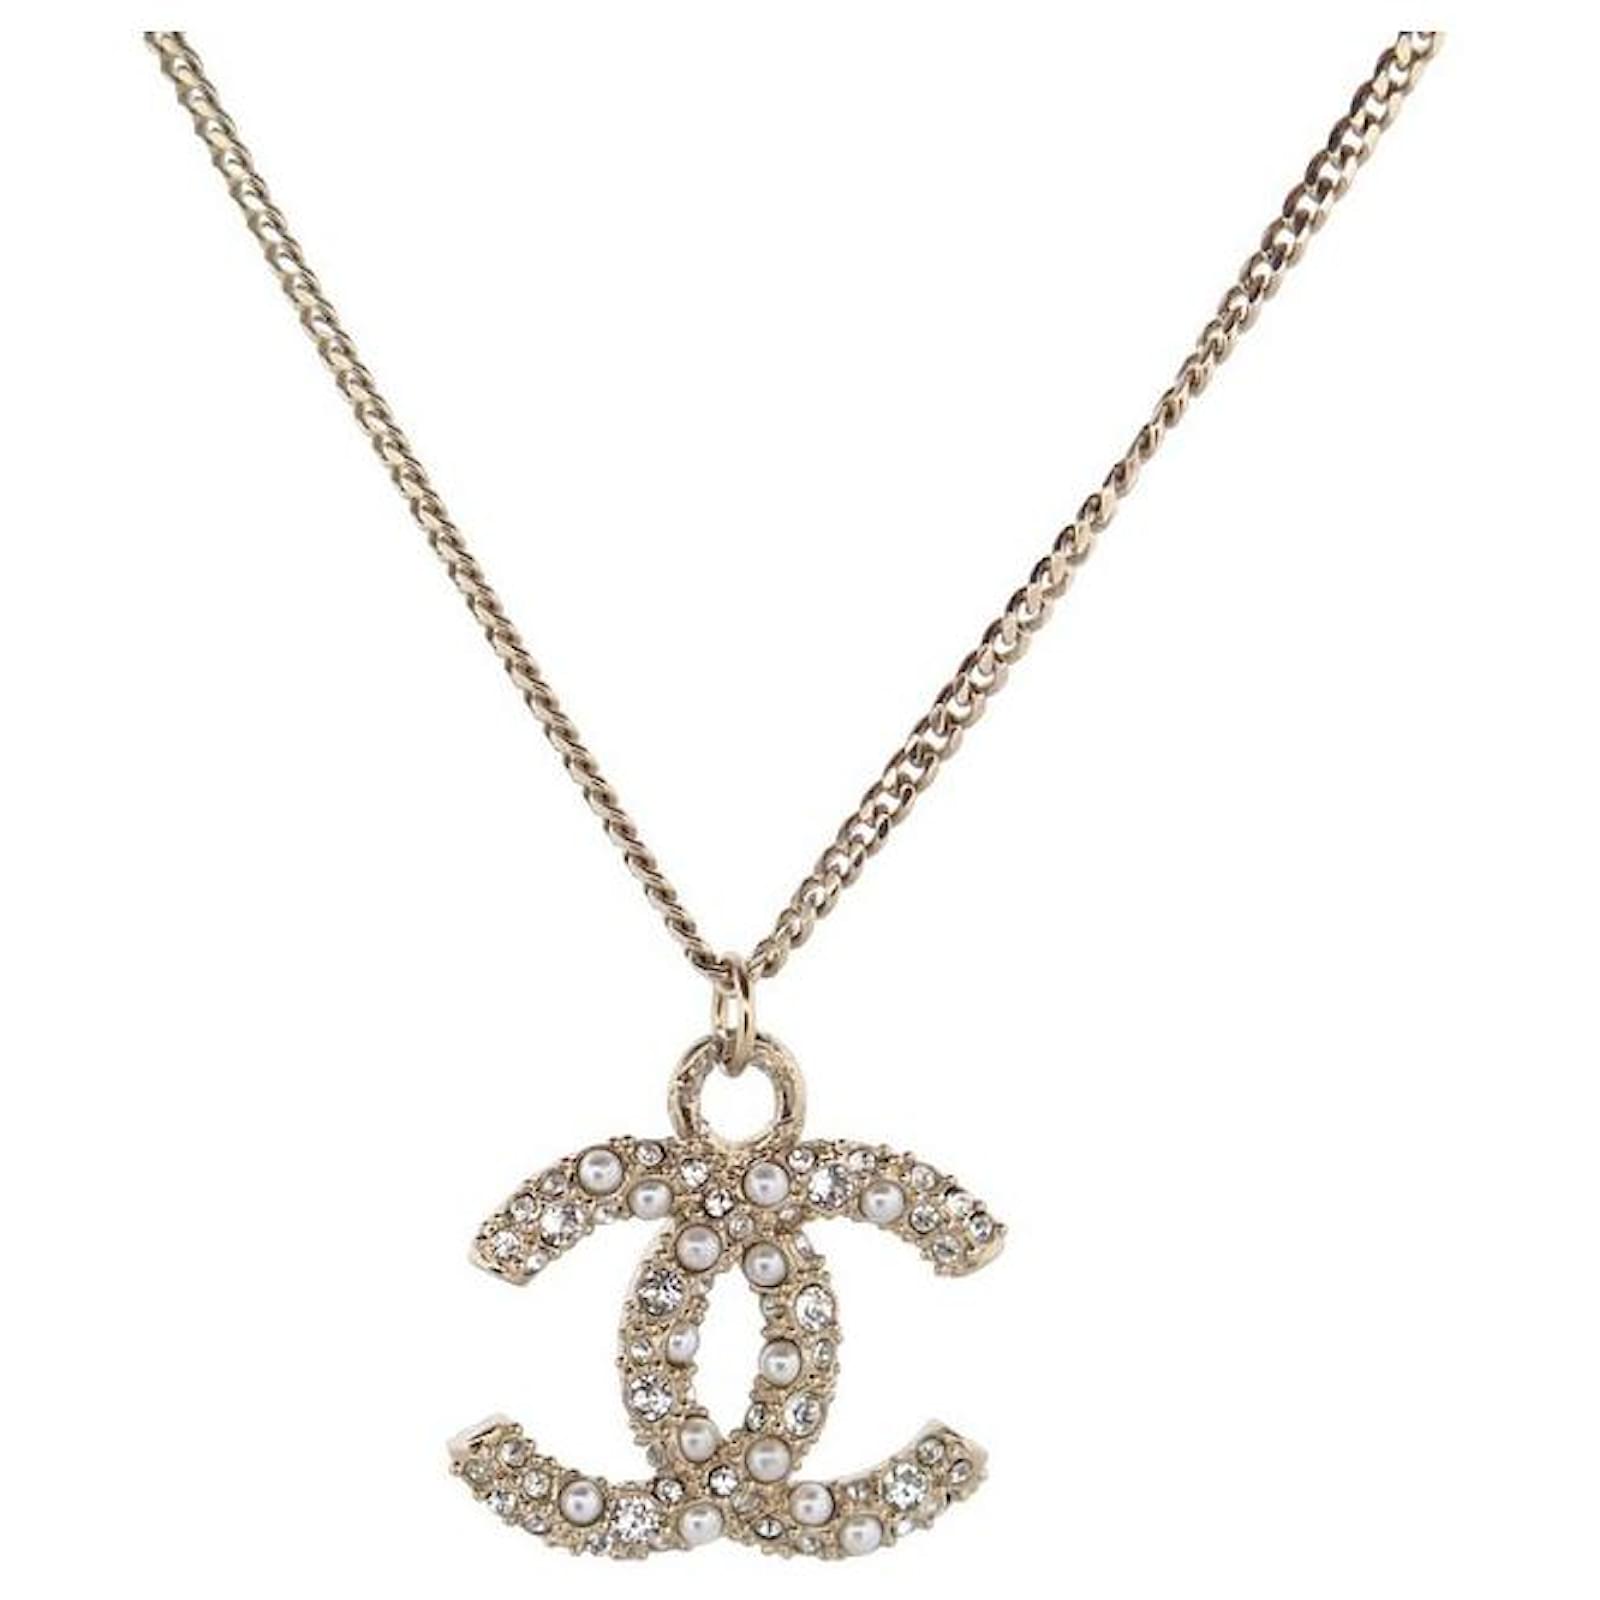 NEW CHANEL PENDANT NECKLACE LOGO CC IN PEARLS & GOLD METAL NECKLACE